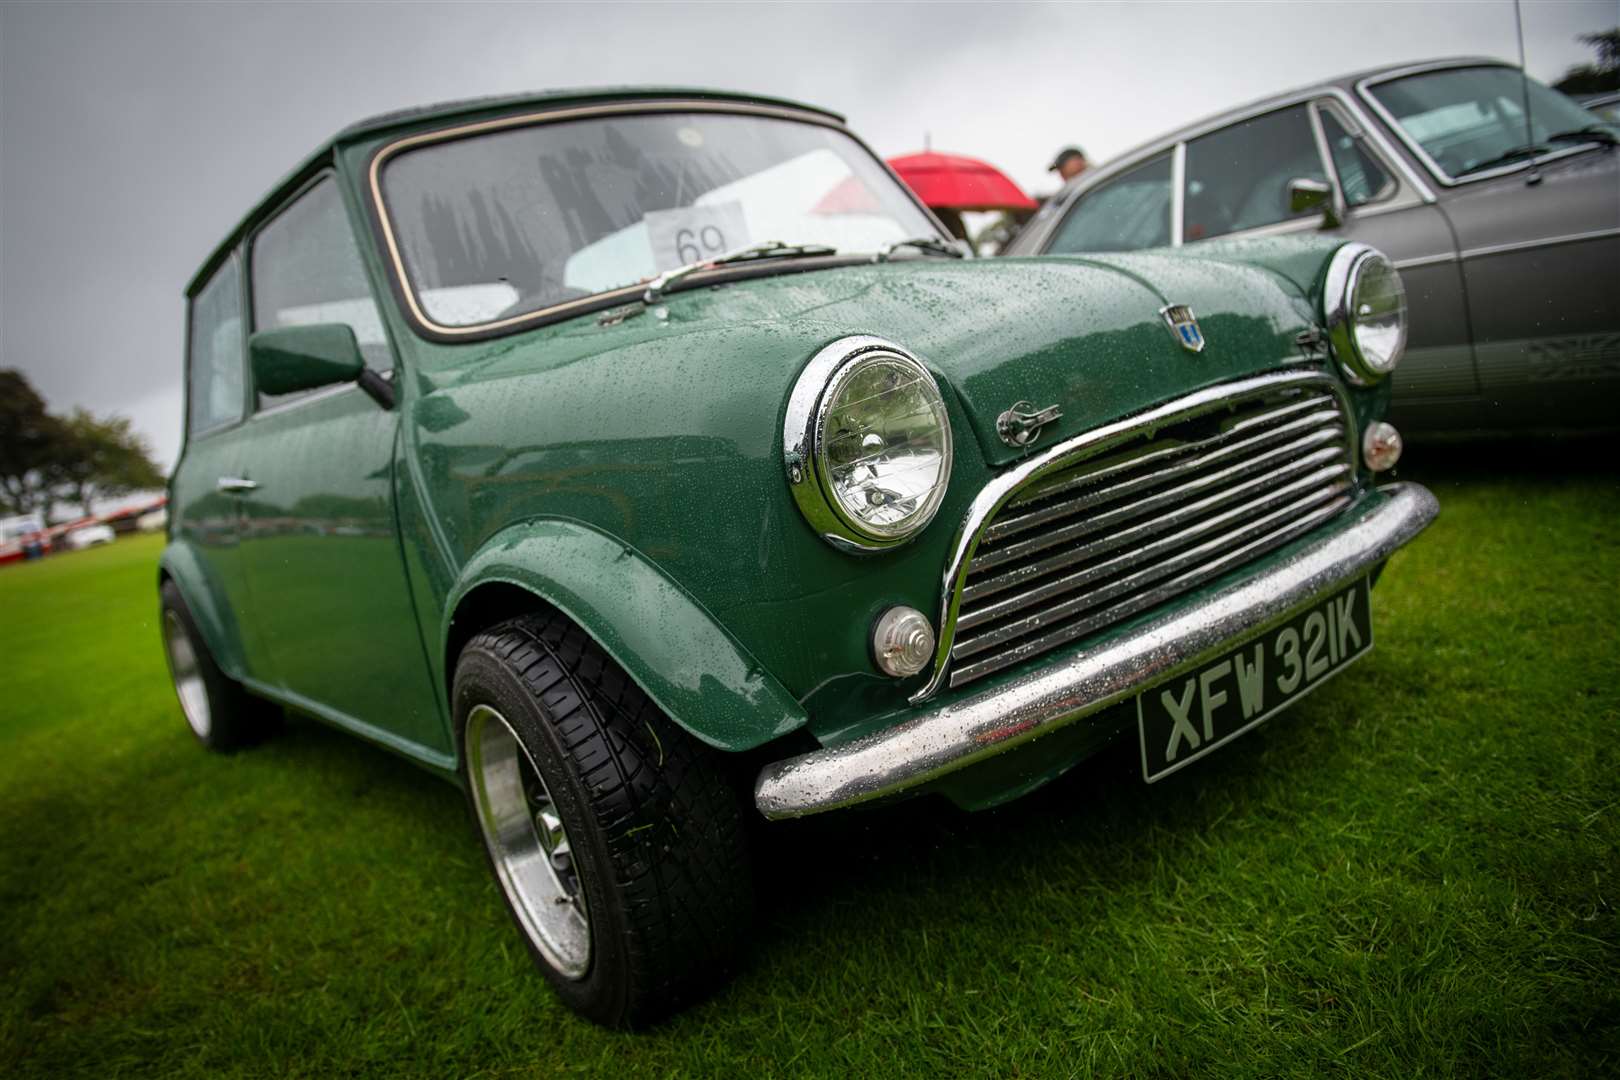 One of the vehicles on show. Picture: Callum Mackay